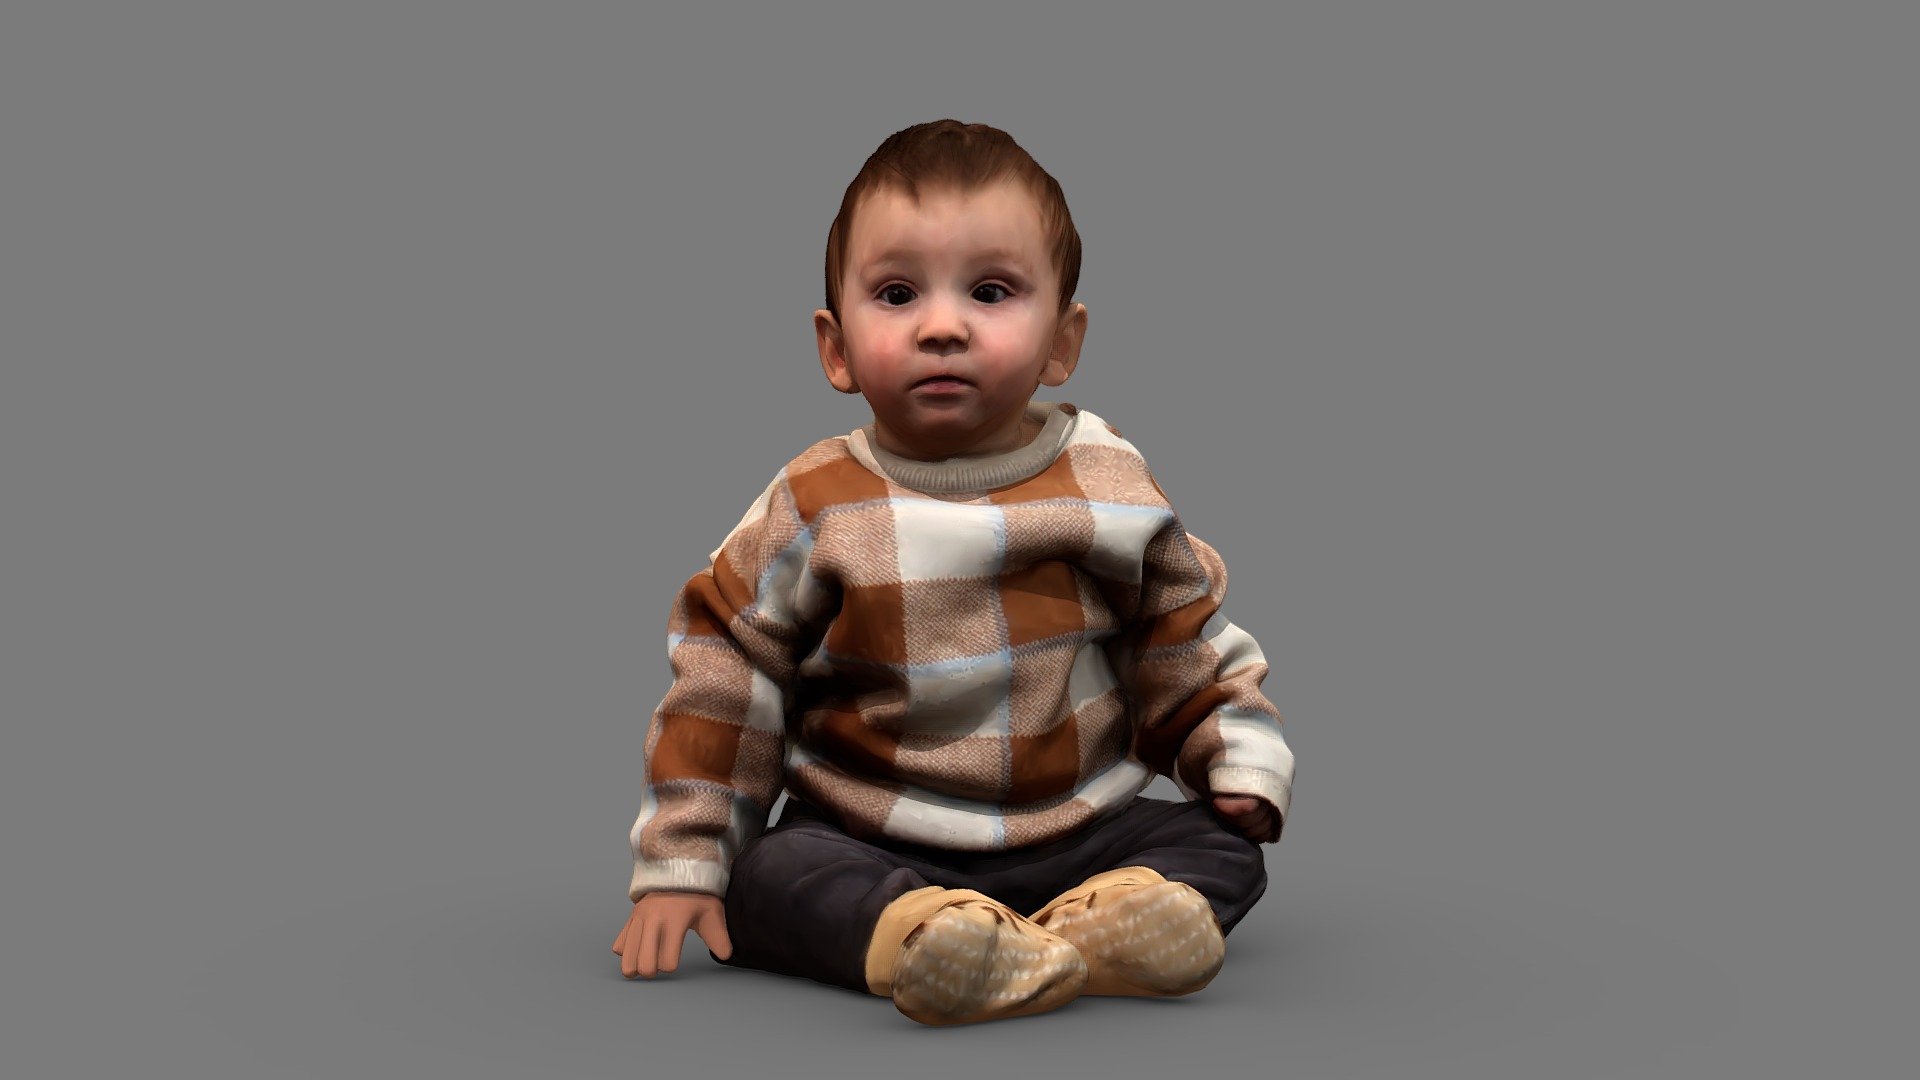 We present to you our 3D digital model of a baby, with precise details and textures that make it look so real that you will want to hug it. This 3D digital model will allow you to see the baby from any angle and customize her clothes and accessories with unique colors and designs 3d model